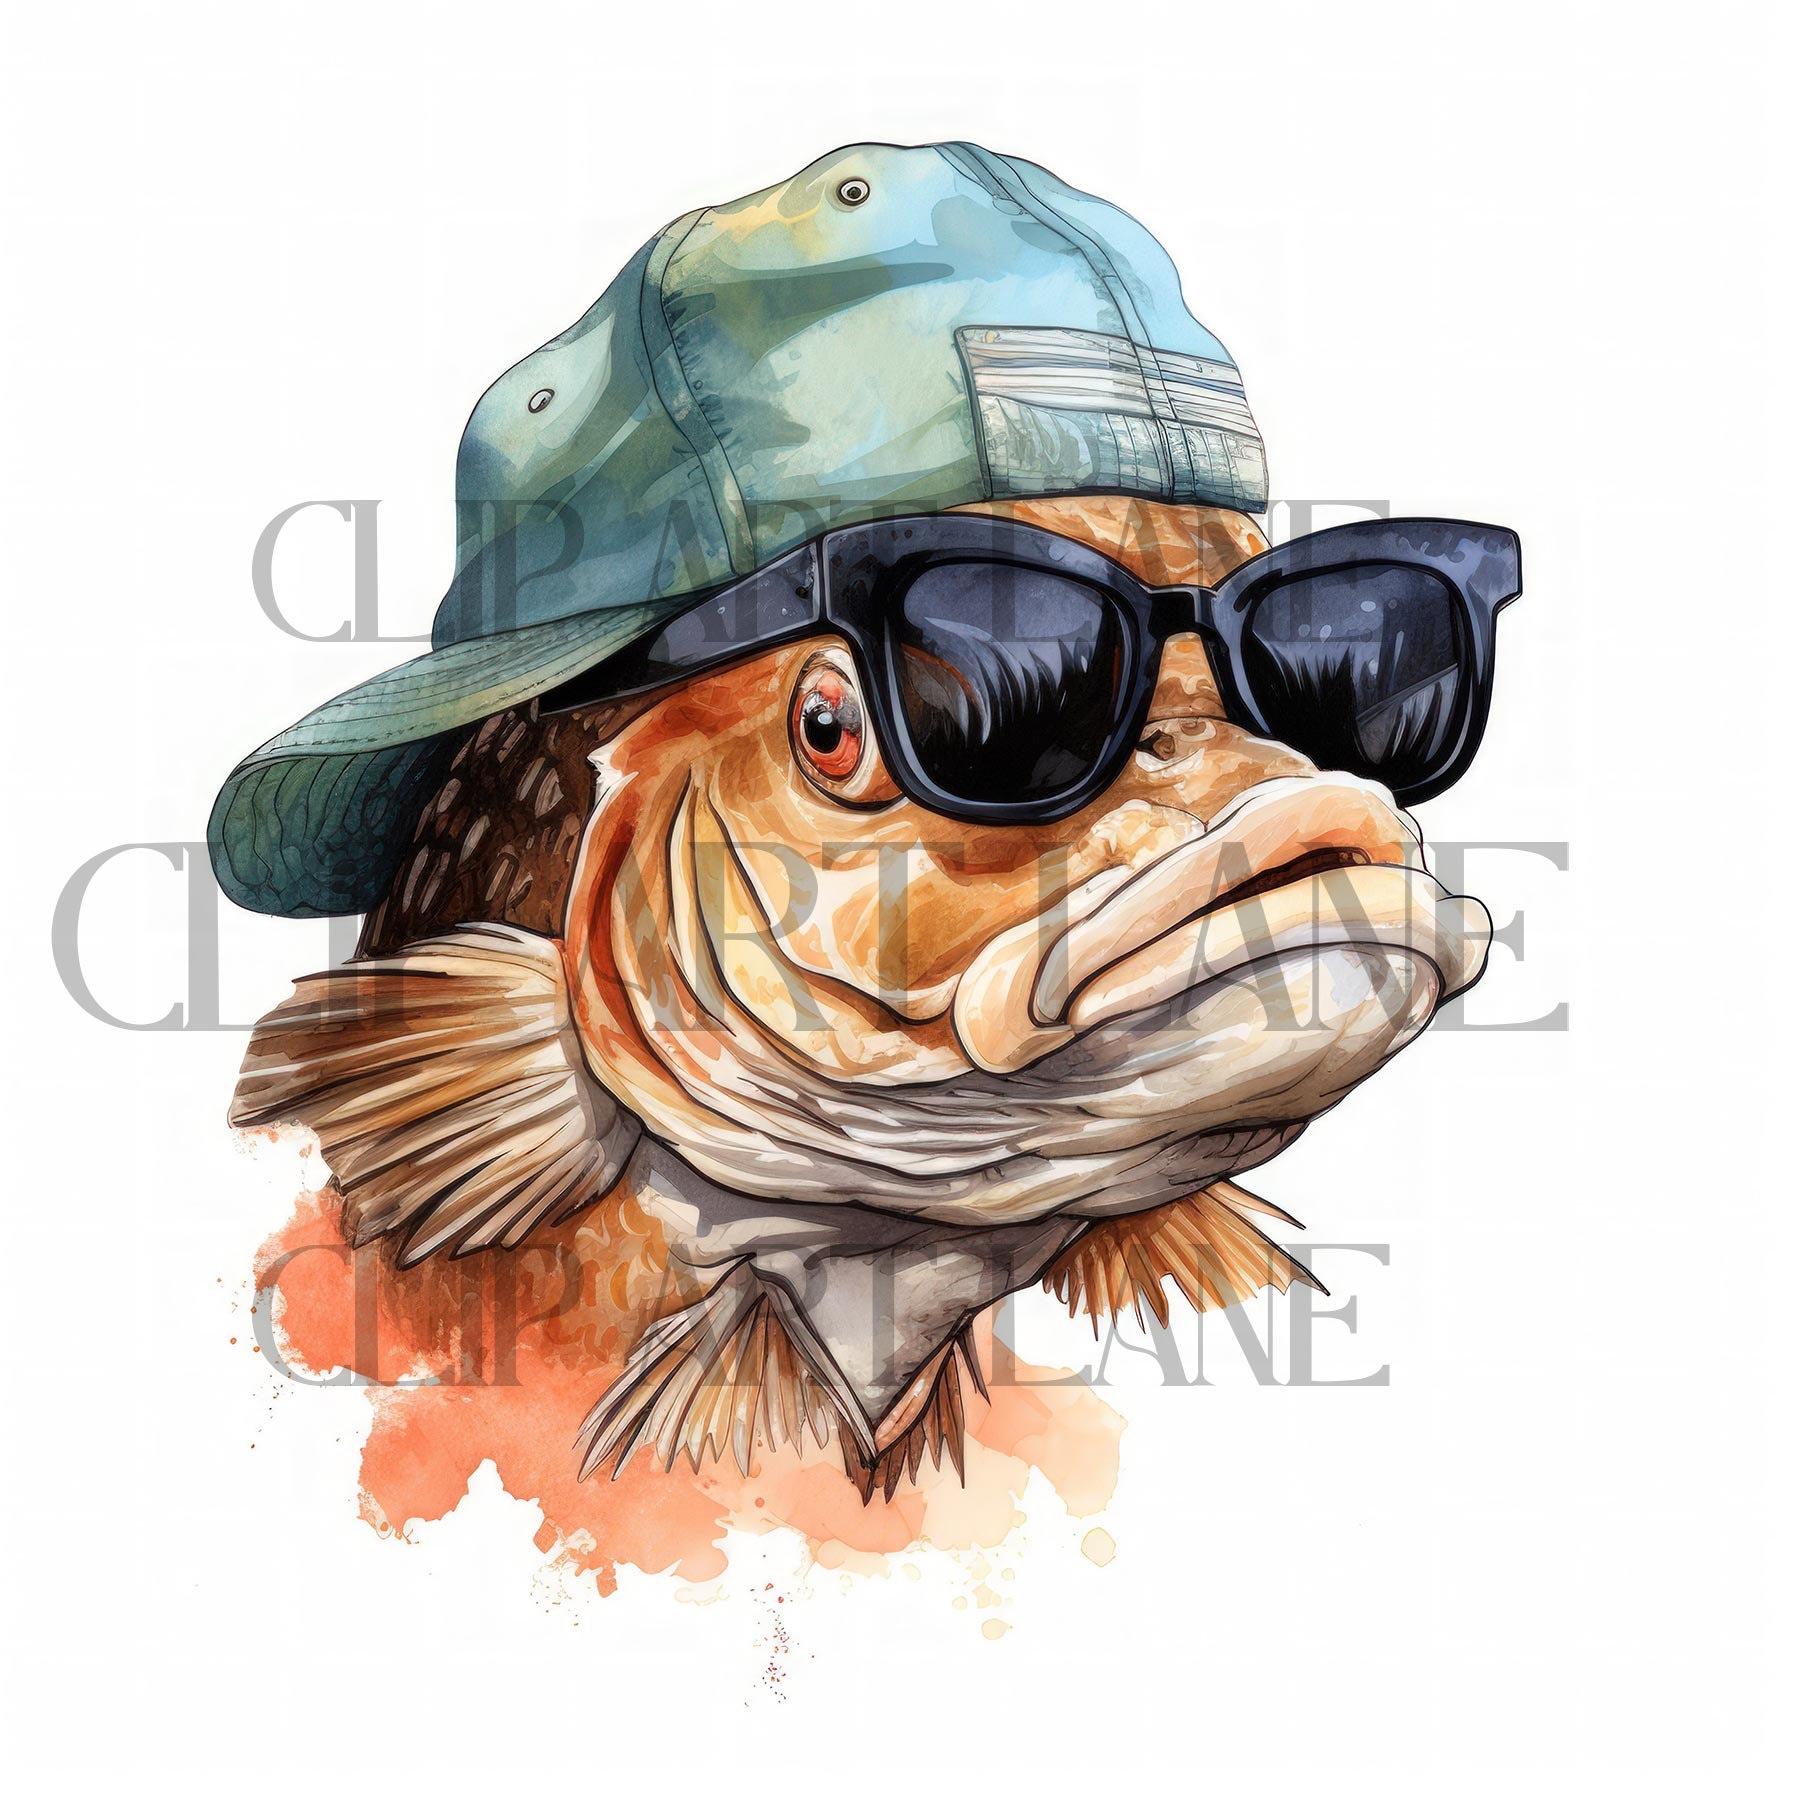 Bass Fish Clipart Funny 15 High Quality Jpgs Funny Bass Fish Images  Sunglasses Download Fish Artwork Lake Clipart Paper Craft Hats 